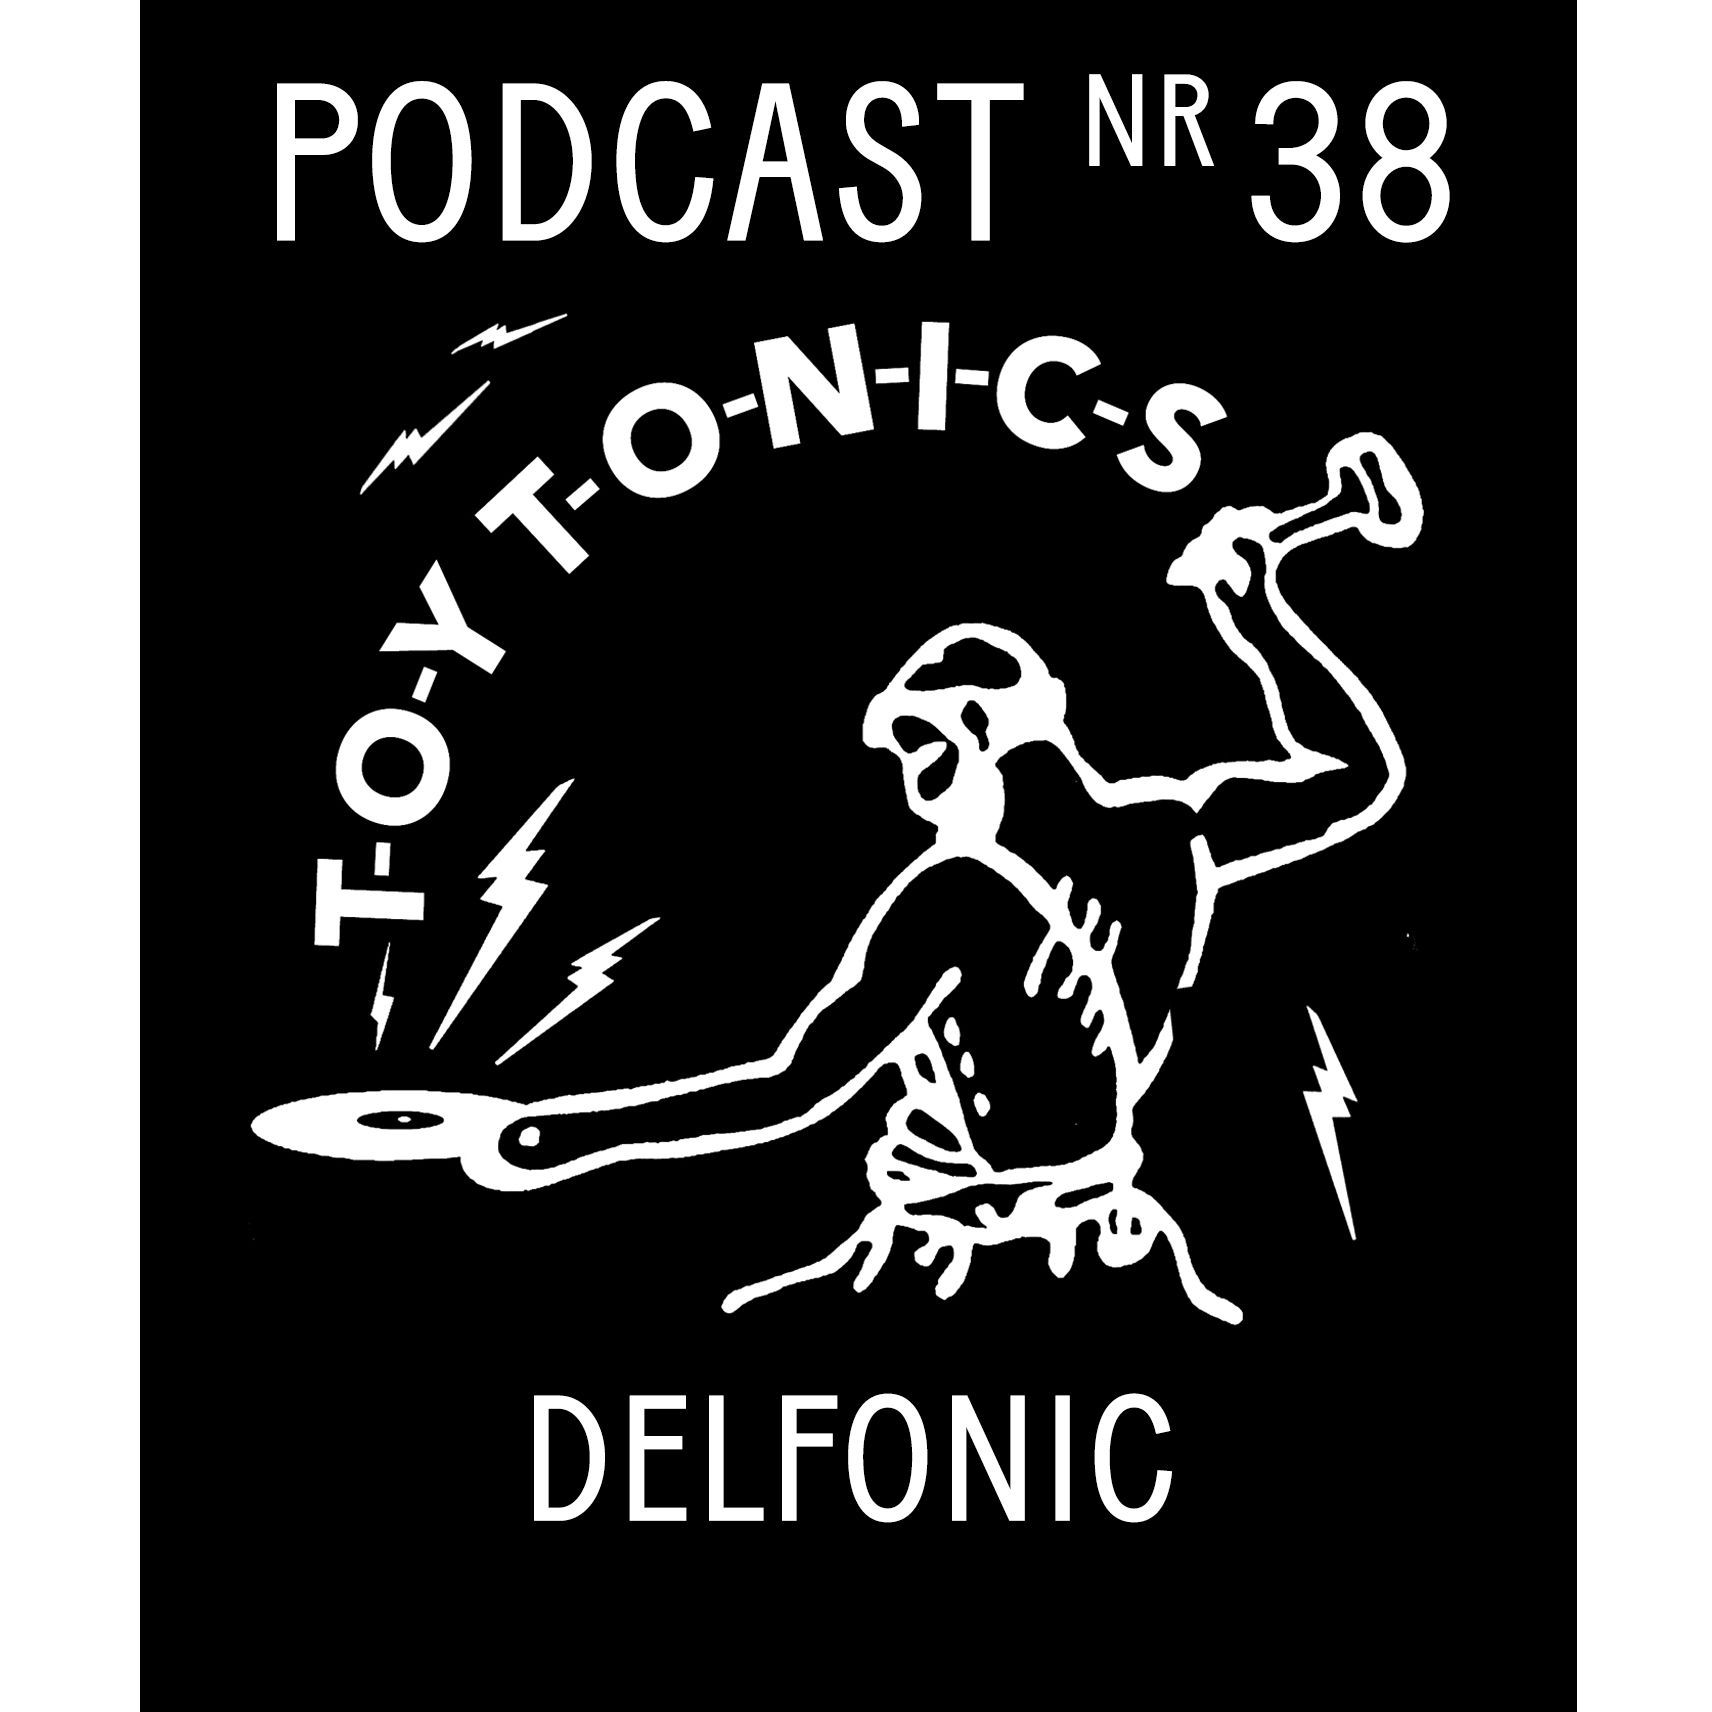 PODCAST NR 38 - Delfonic